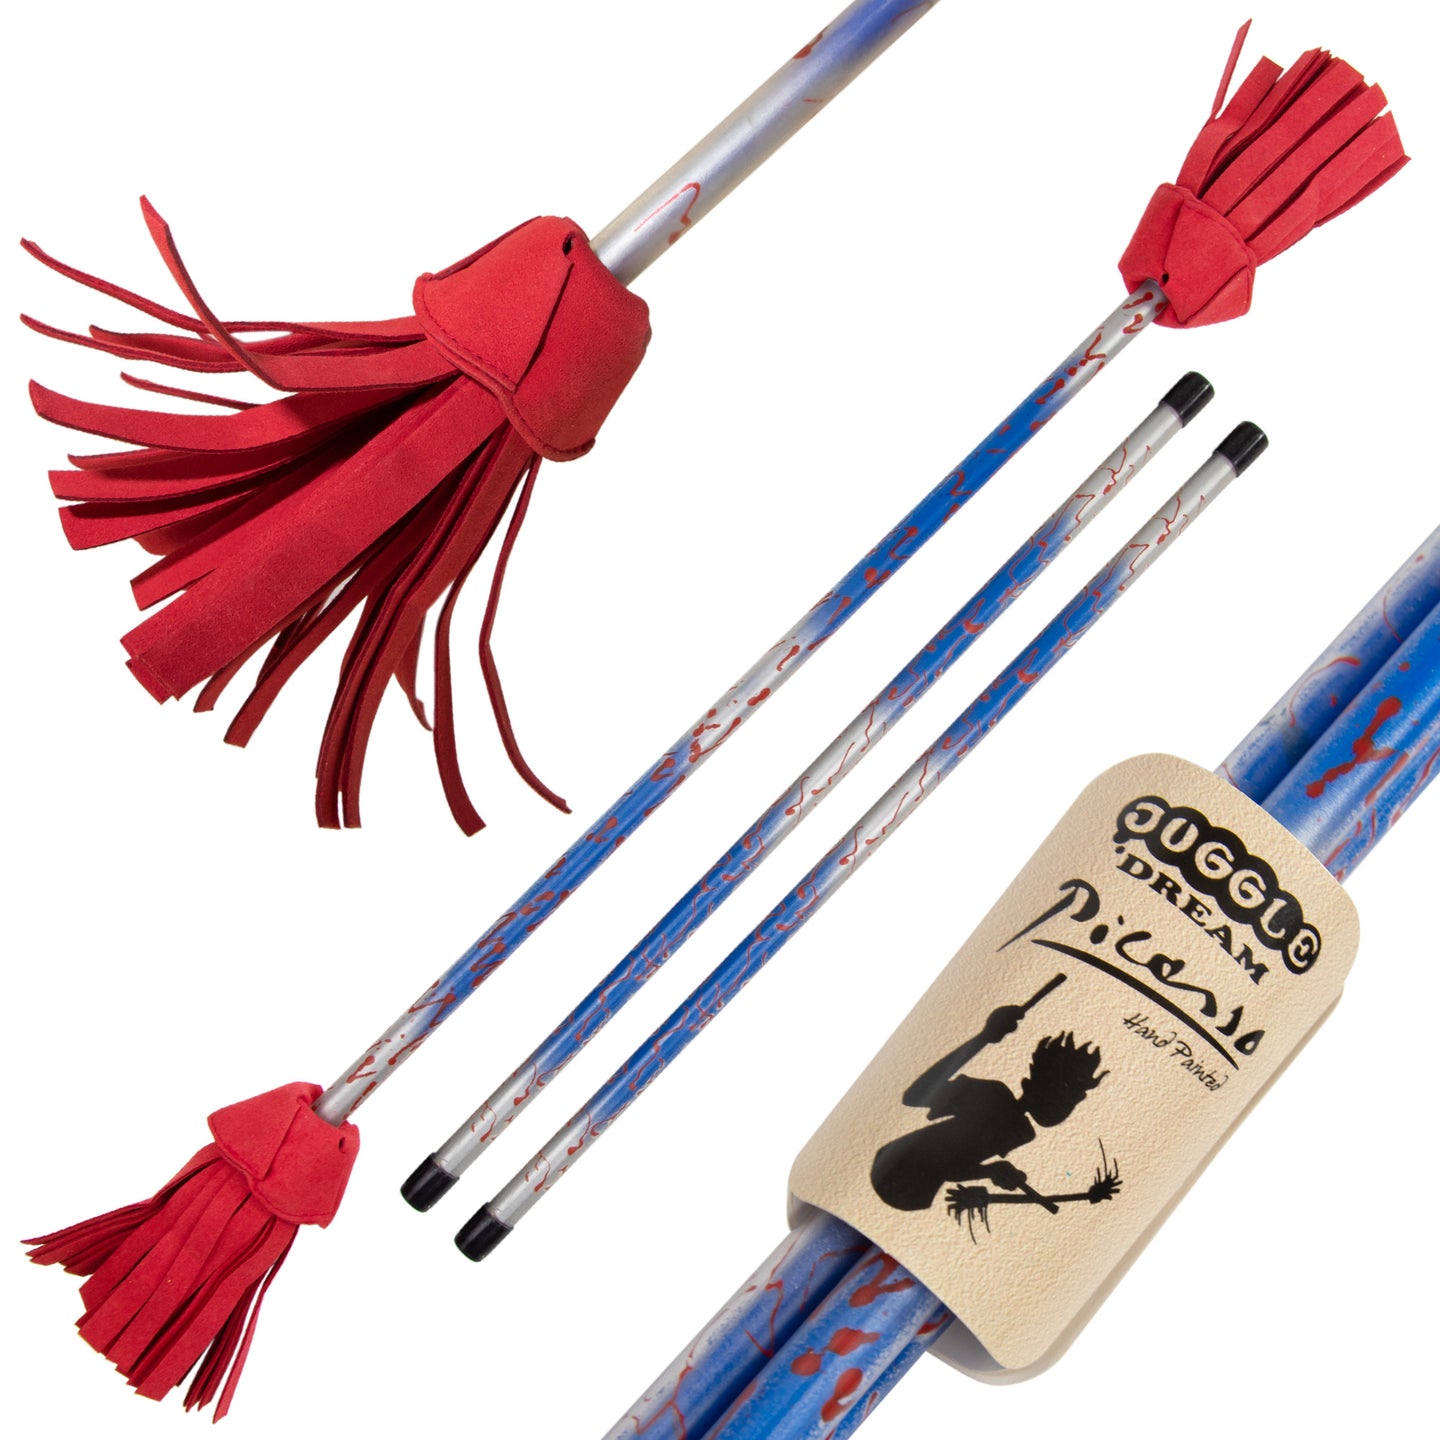 Red/ Silver full size Picasso Flower Stick with Handsticks with close-up of label and tassels